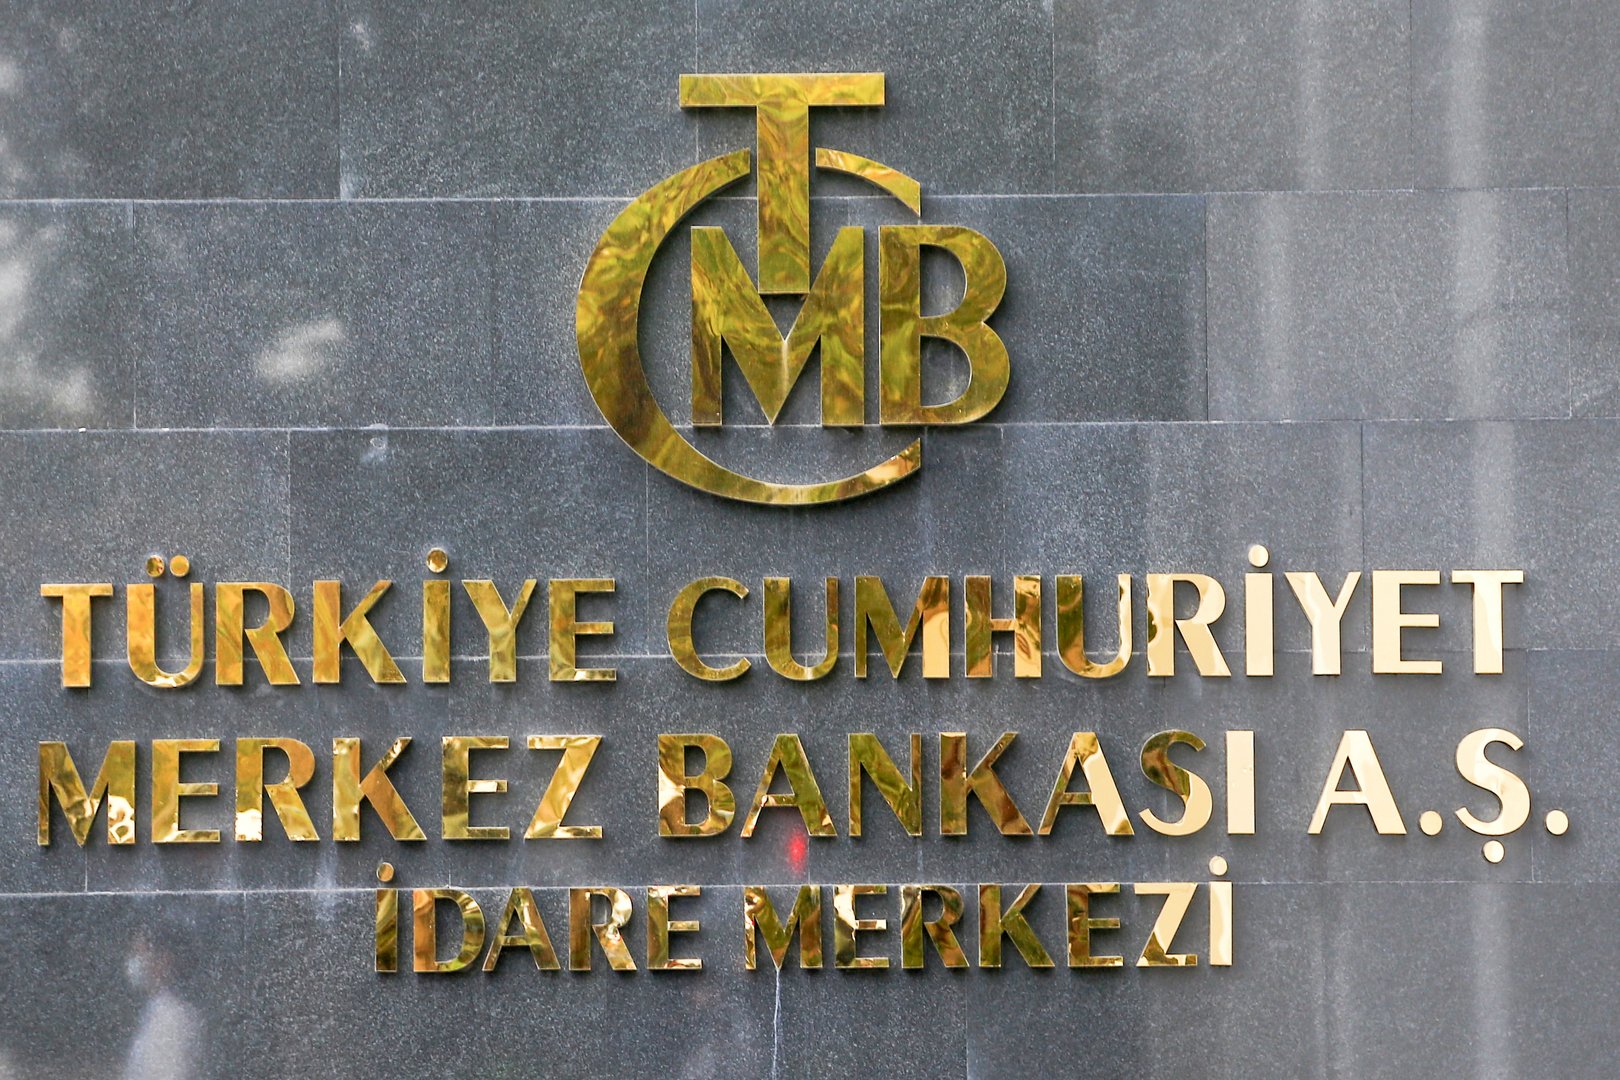 image Turkey’s pursuance of an unusual economic policy